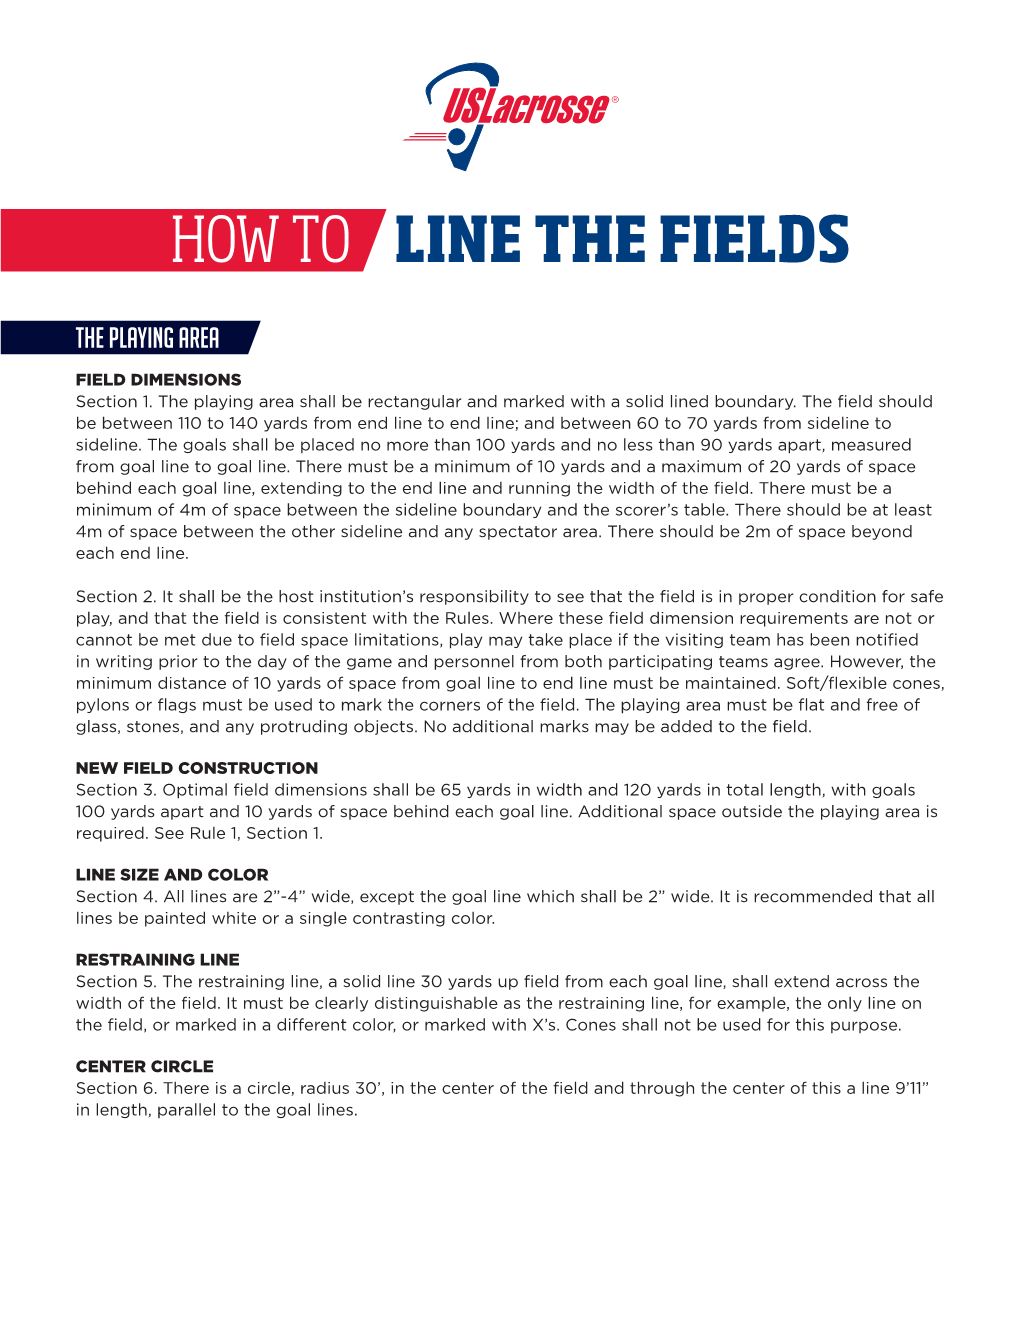 How to Line the Fields